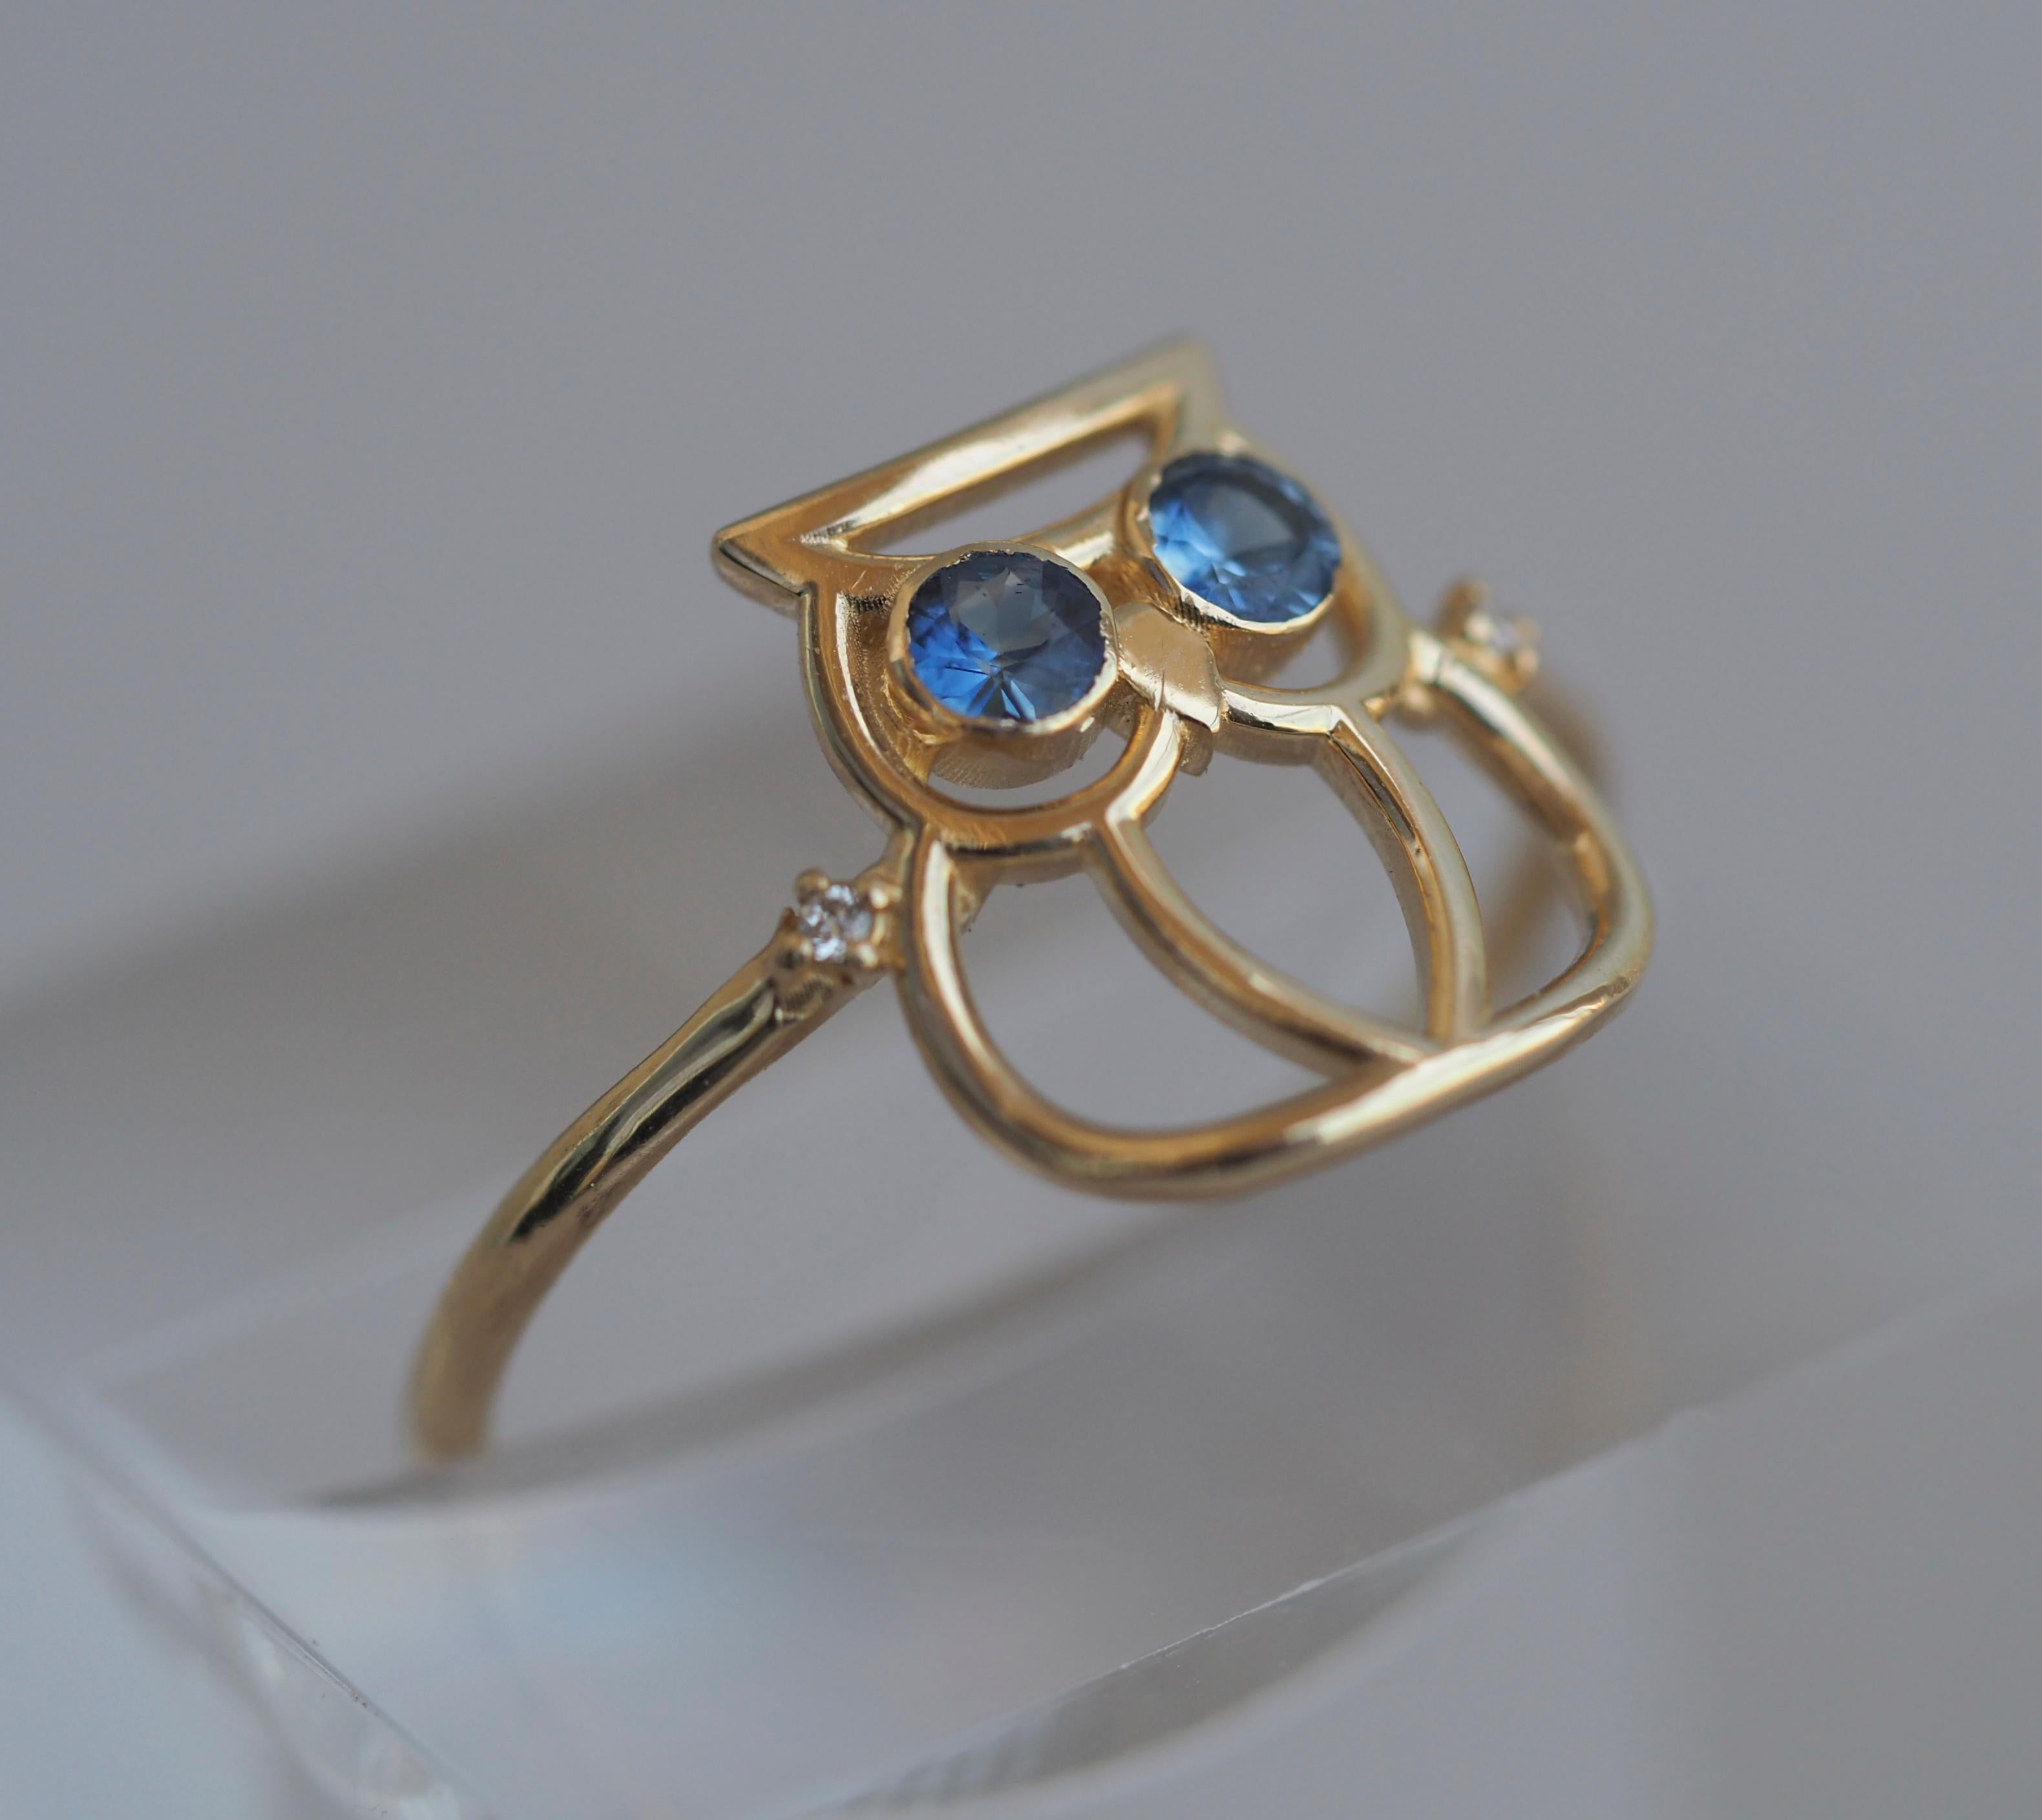 For Sale:  14k Gold Owl Ring with Tanzanite and Diamonds 9